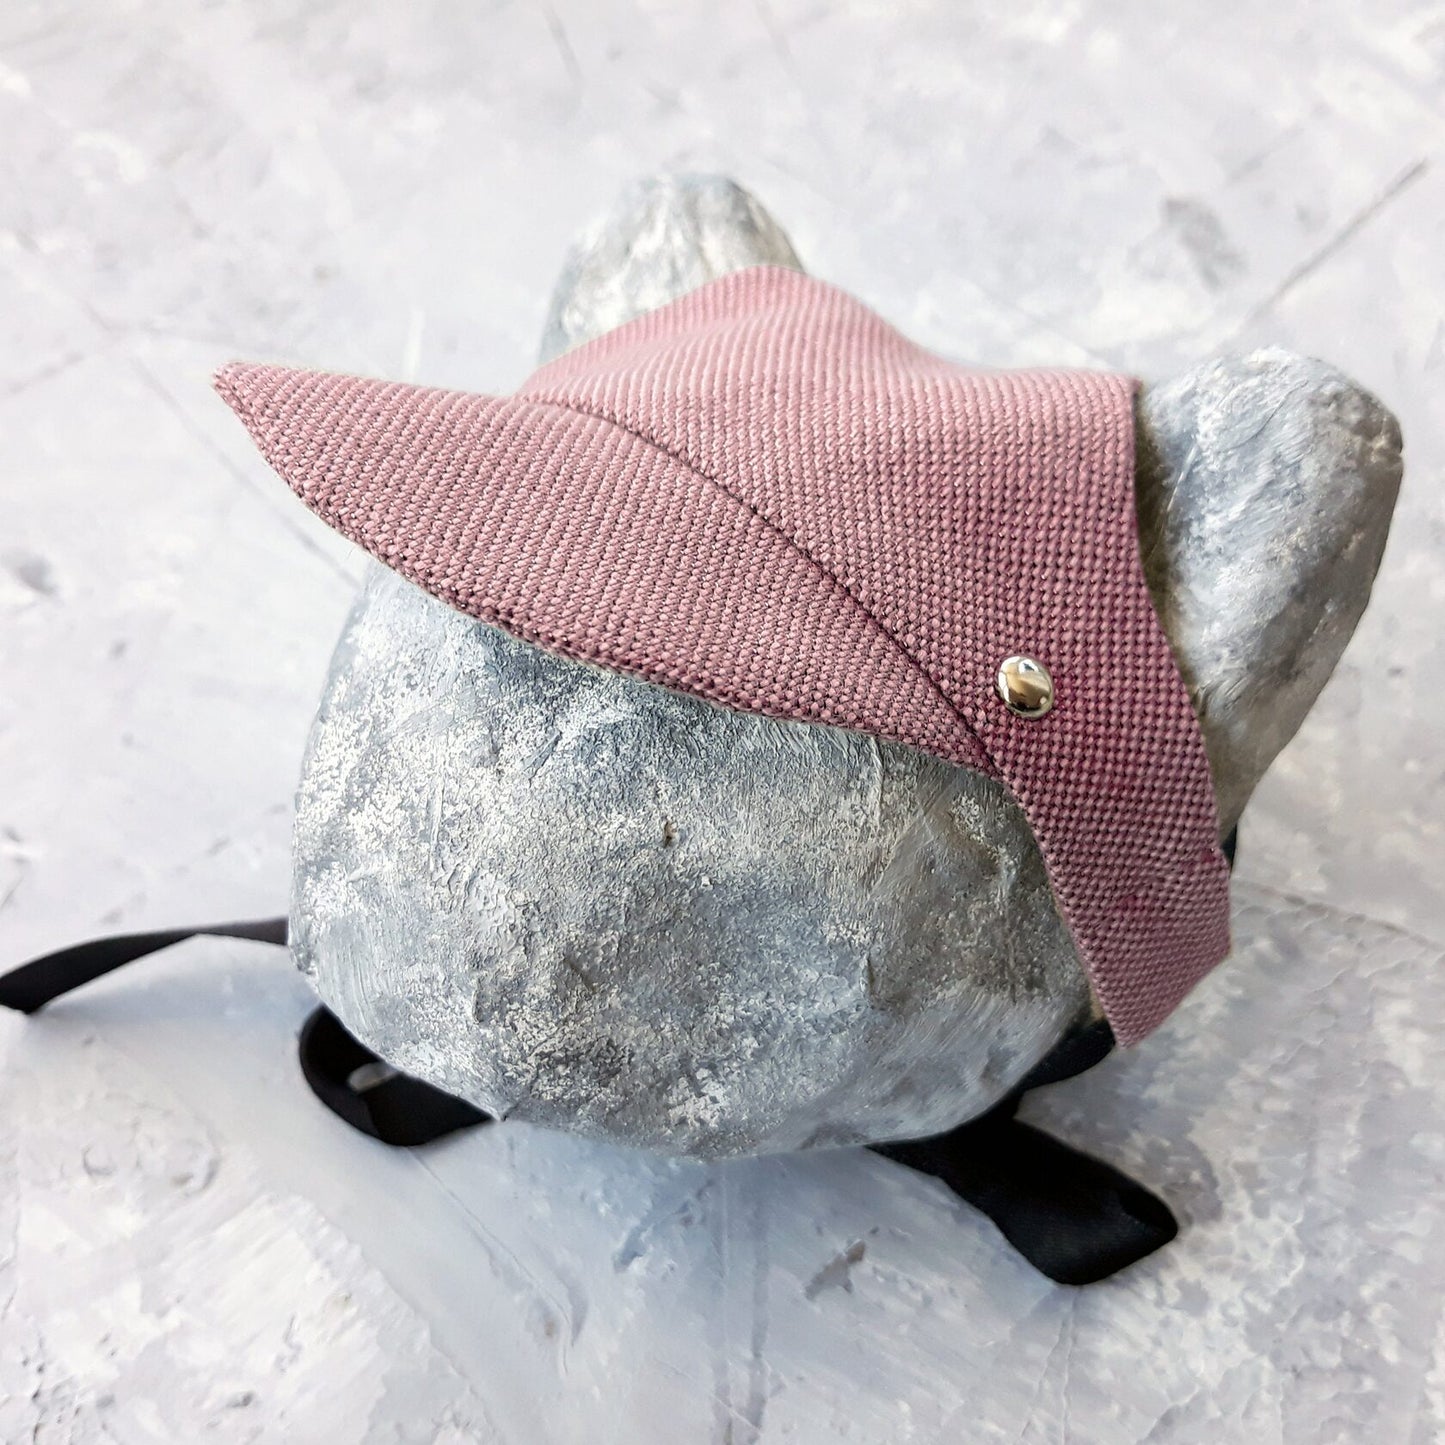 Classic pink hat for cat